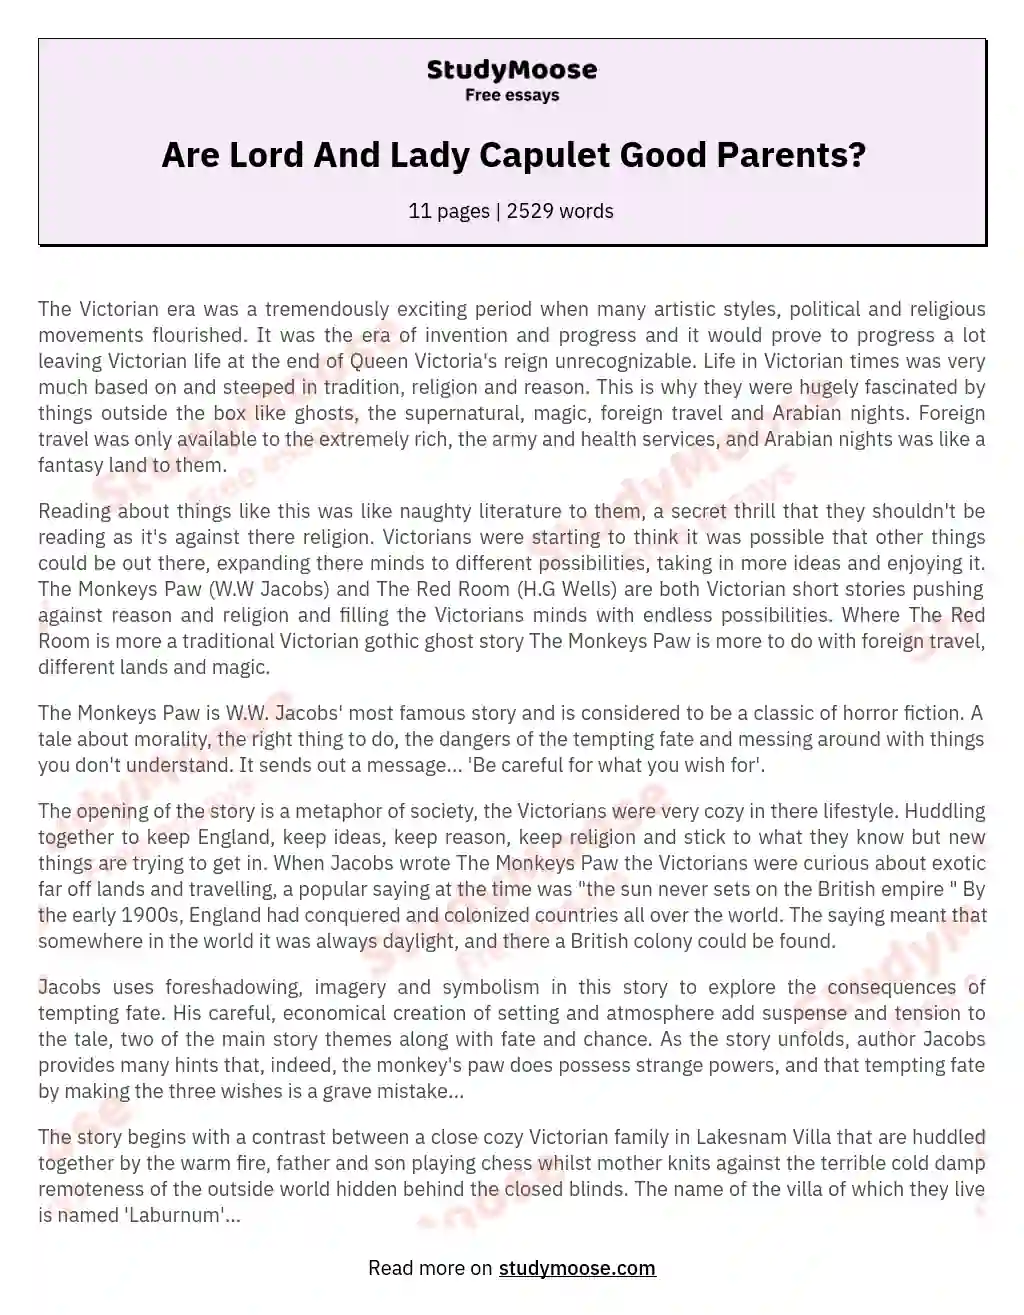 Are Lord And Lady Capulet Good Parents? essay